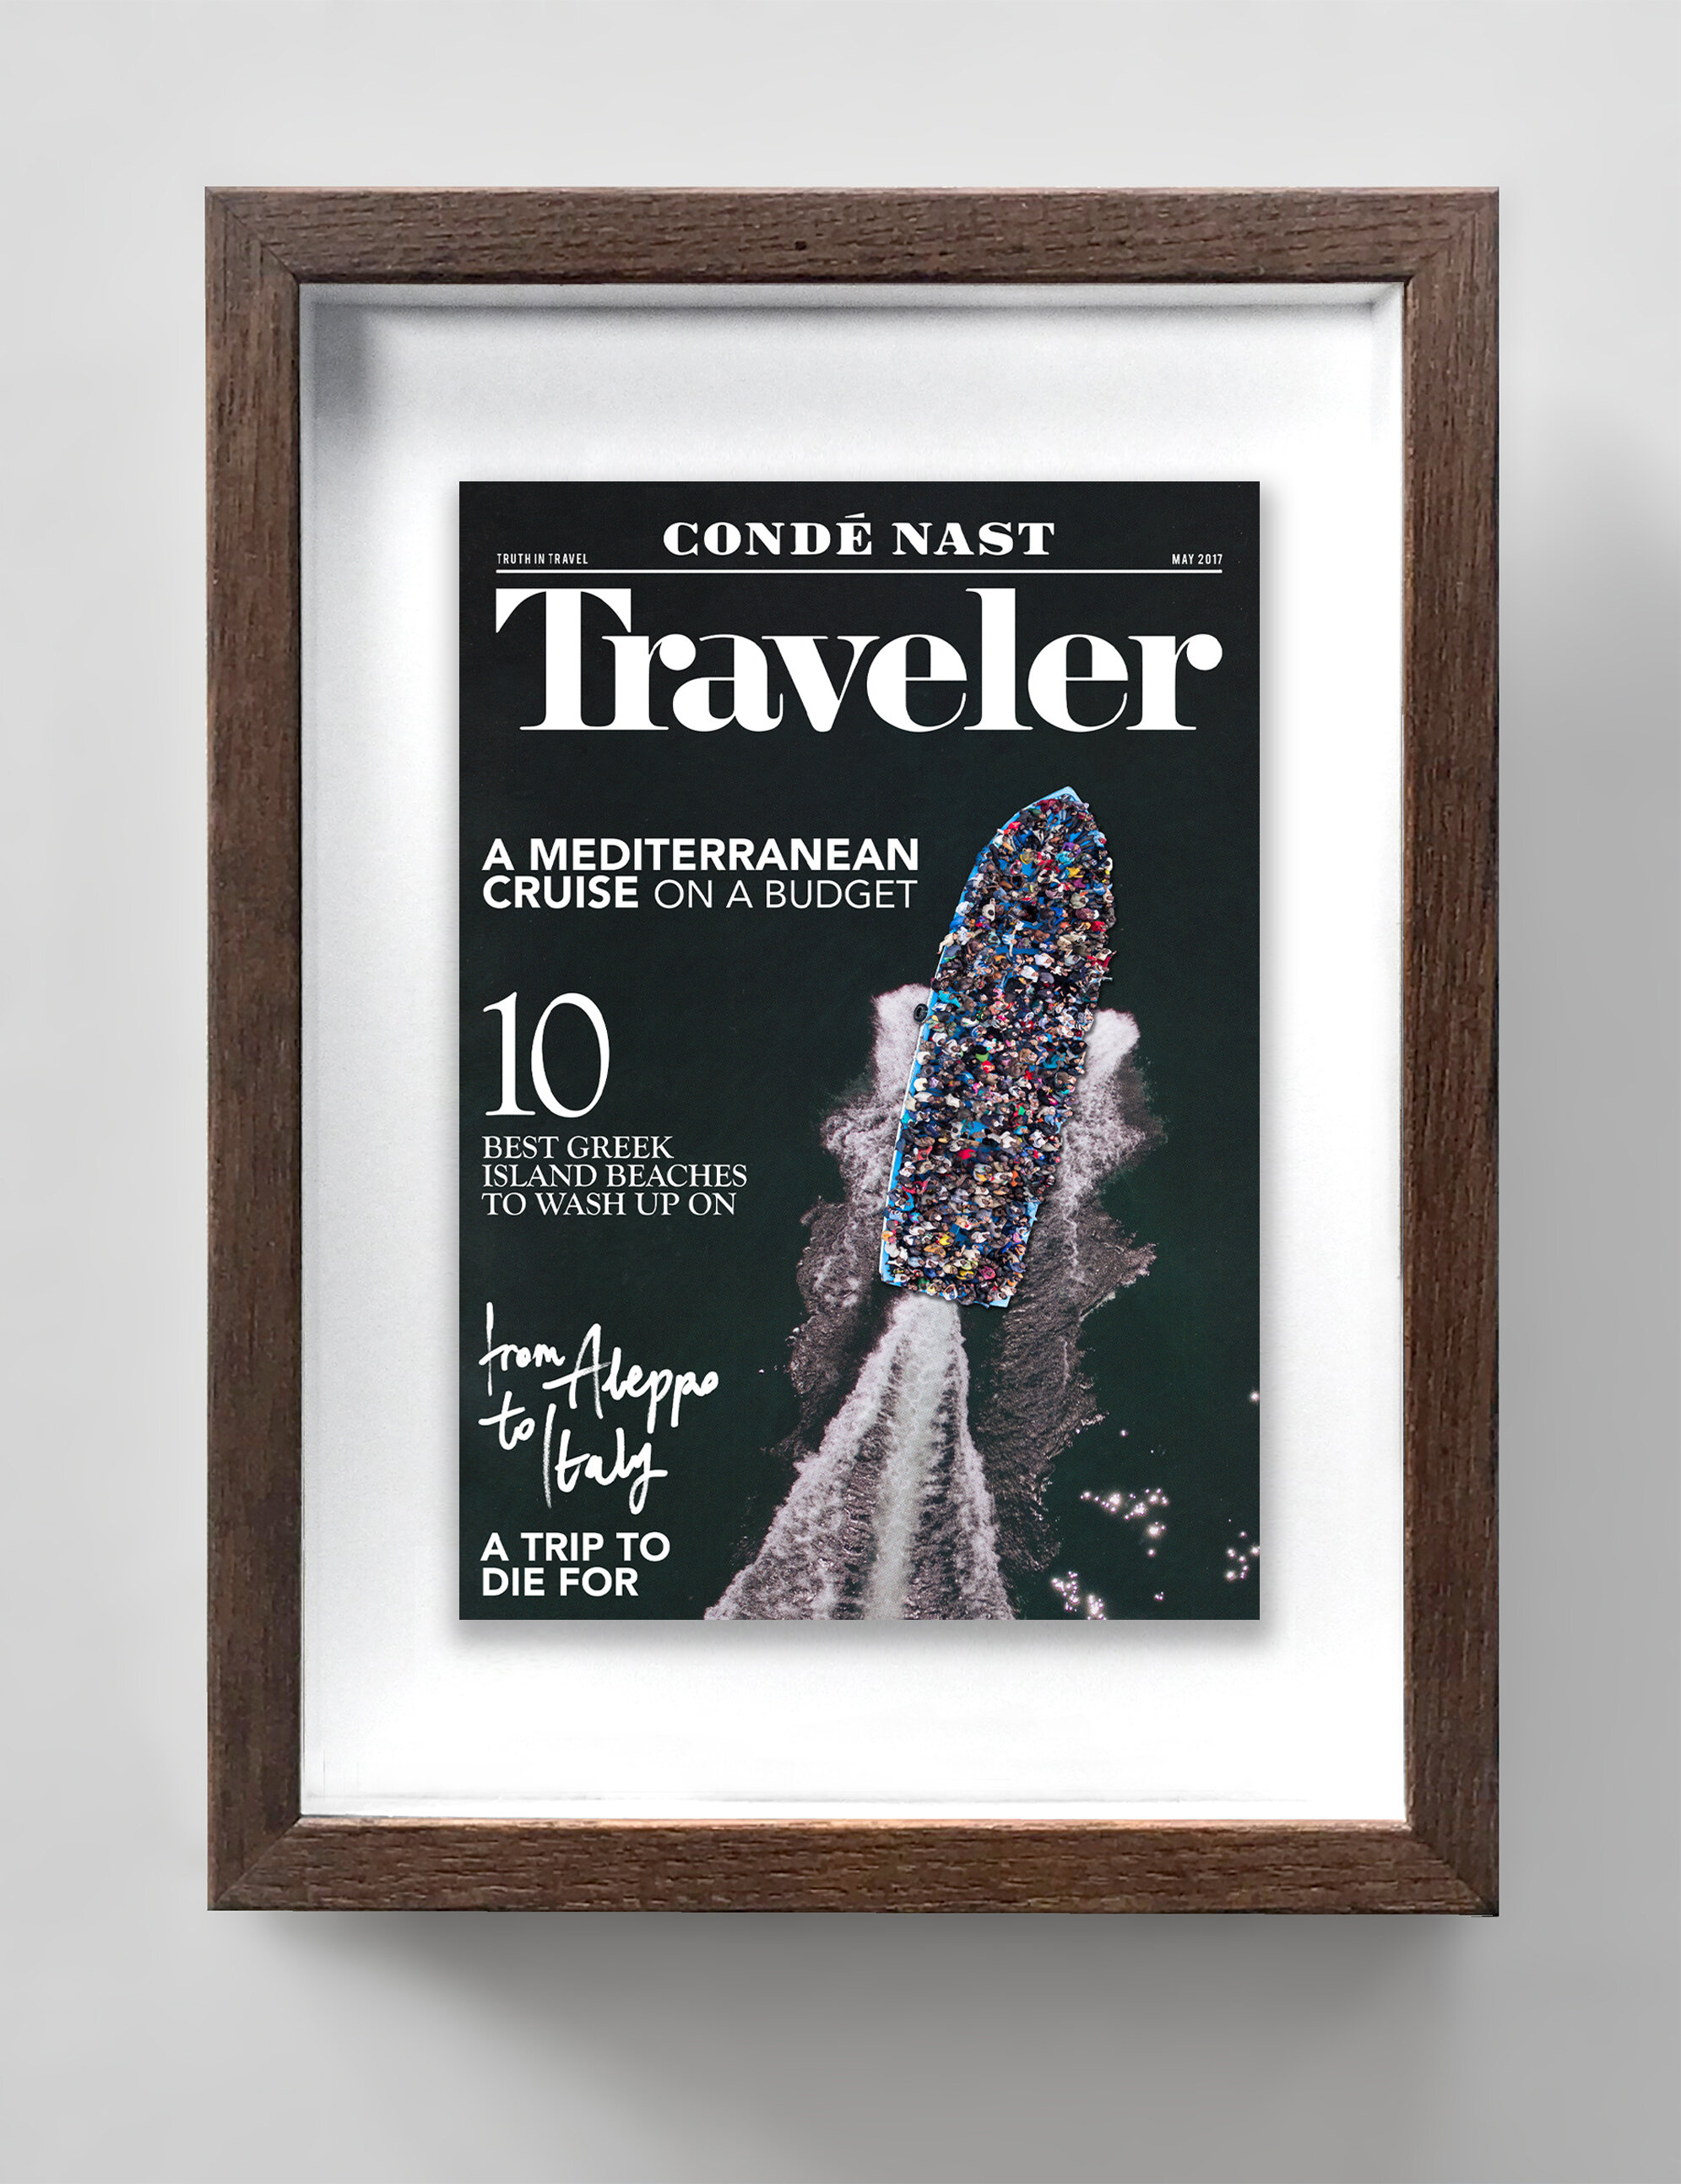 Refuchic - Conde Nast Traveller, by The Connor Brothers - 2015 - Courtesy of Maddox Gallery.jpg